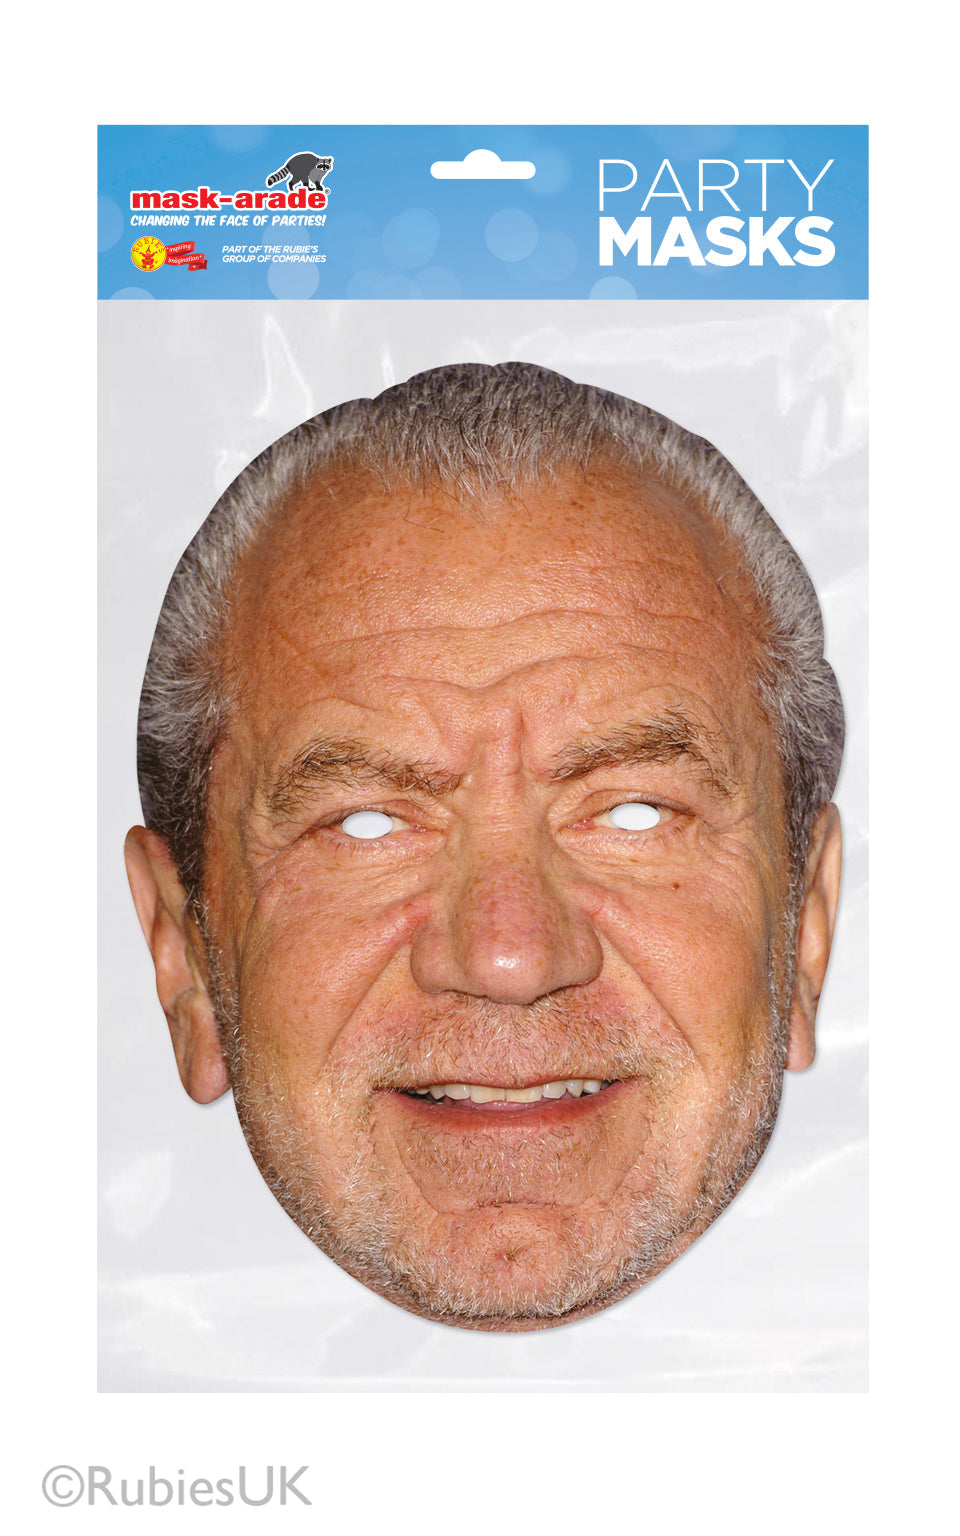 Alan Sugar Celebrity Face Mask. Life size card face mask comes with eye holes and elastic fastening.